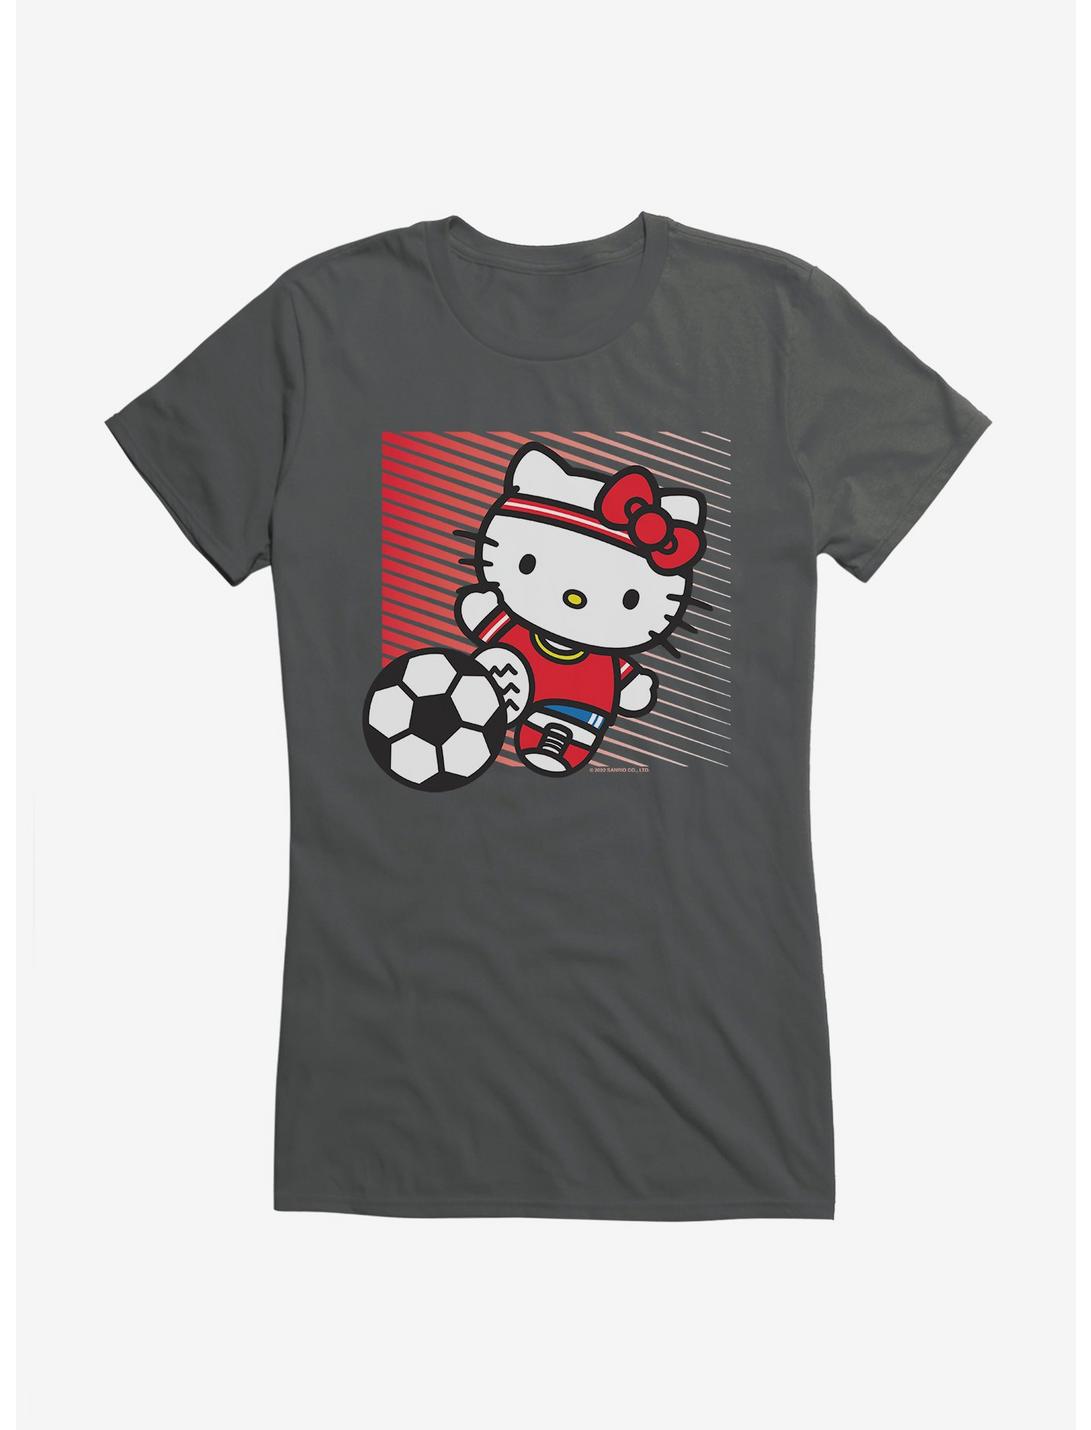 Hello Kitty Soccer Speed Girls T-Shirt, CHARCOAL, hi-res